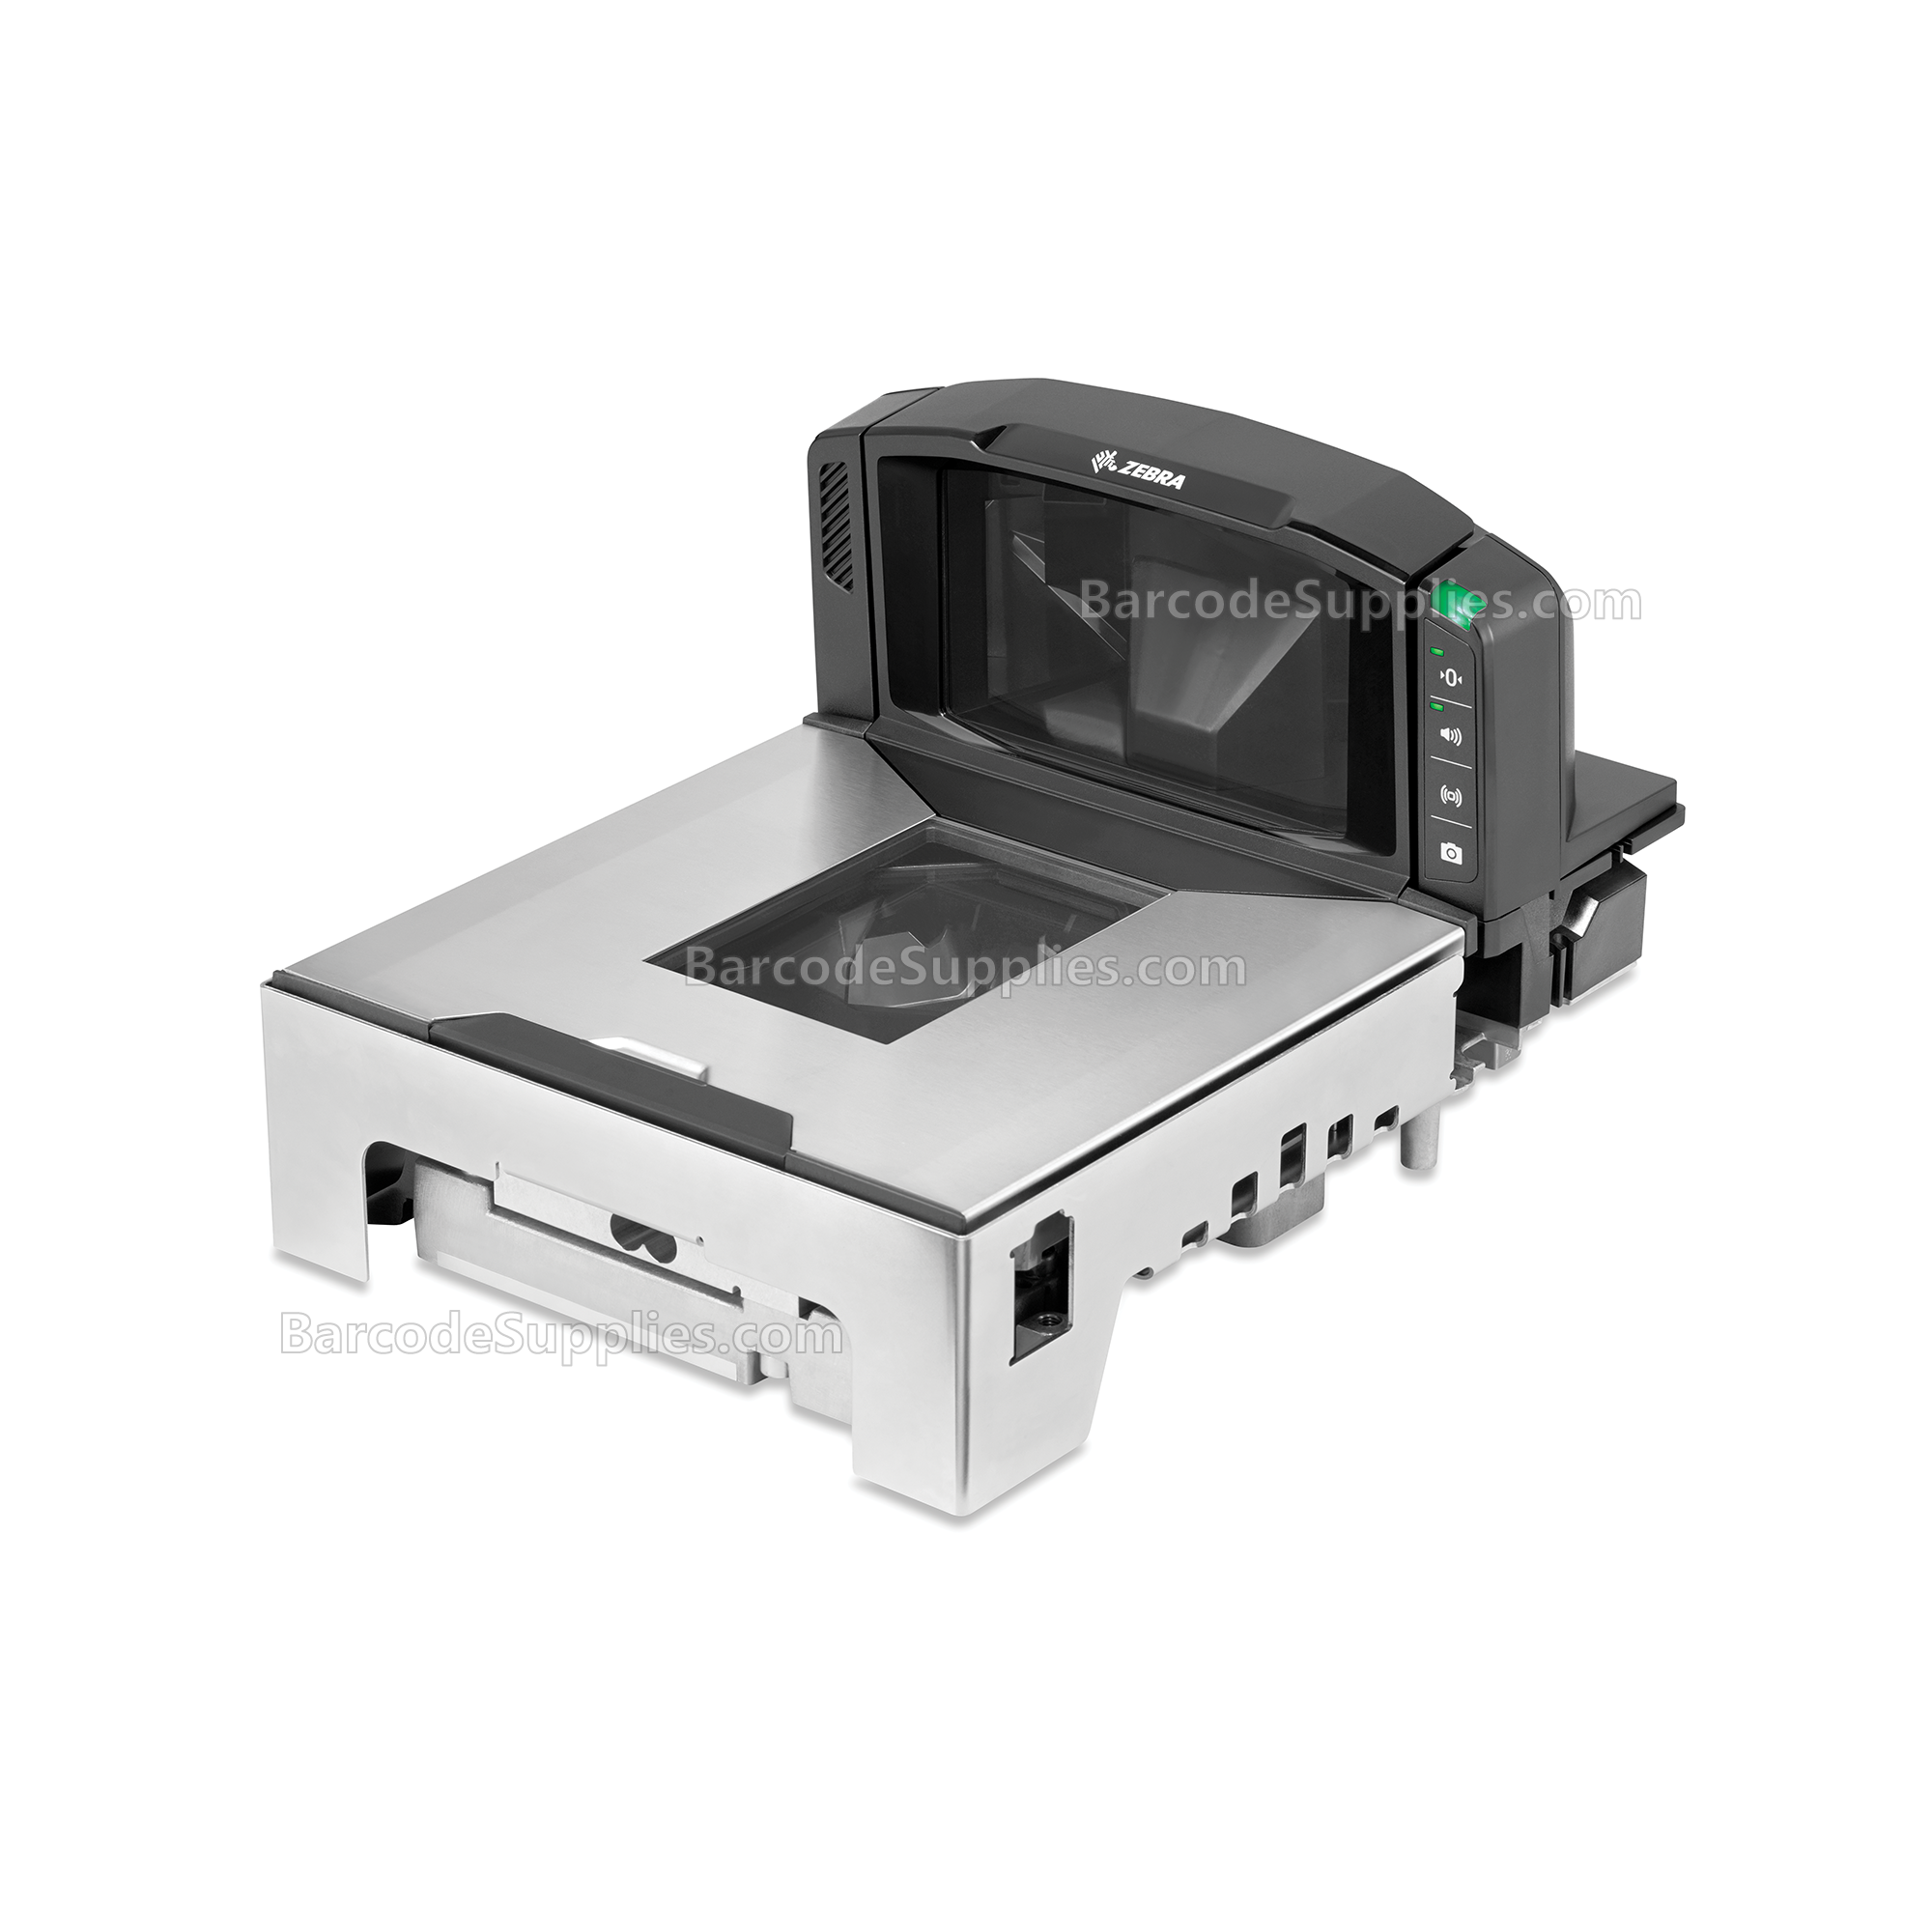 Zebra MP7000: Multiplane scanner, medium, sapphire glass, scanner only/scale ready platter, third party scale support, color camera module landscape, Worldwide